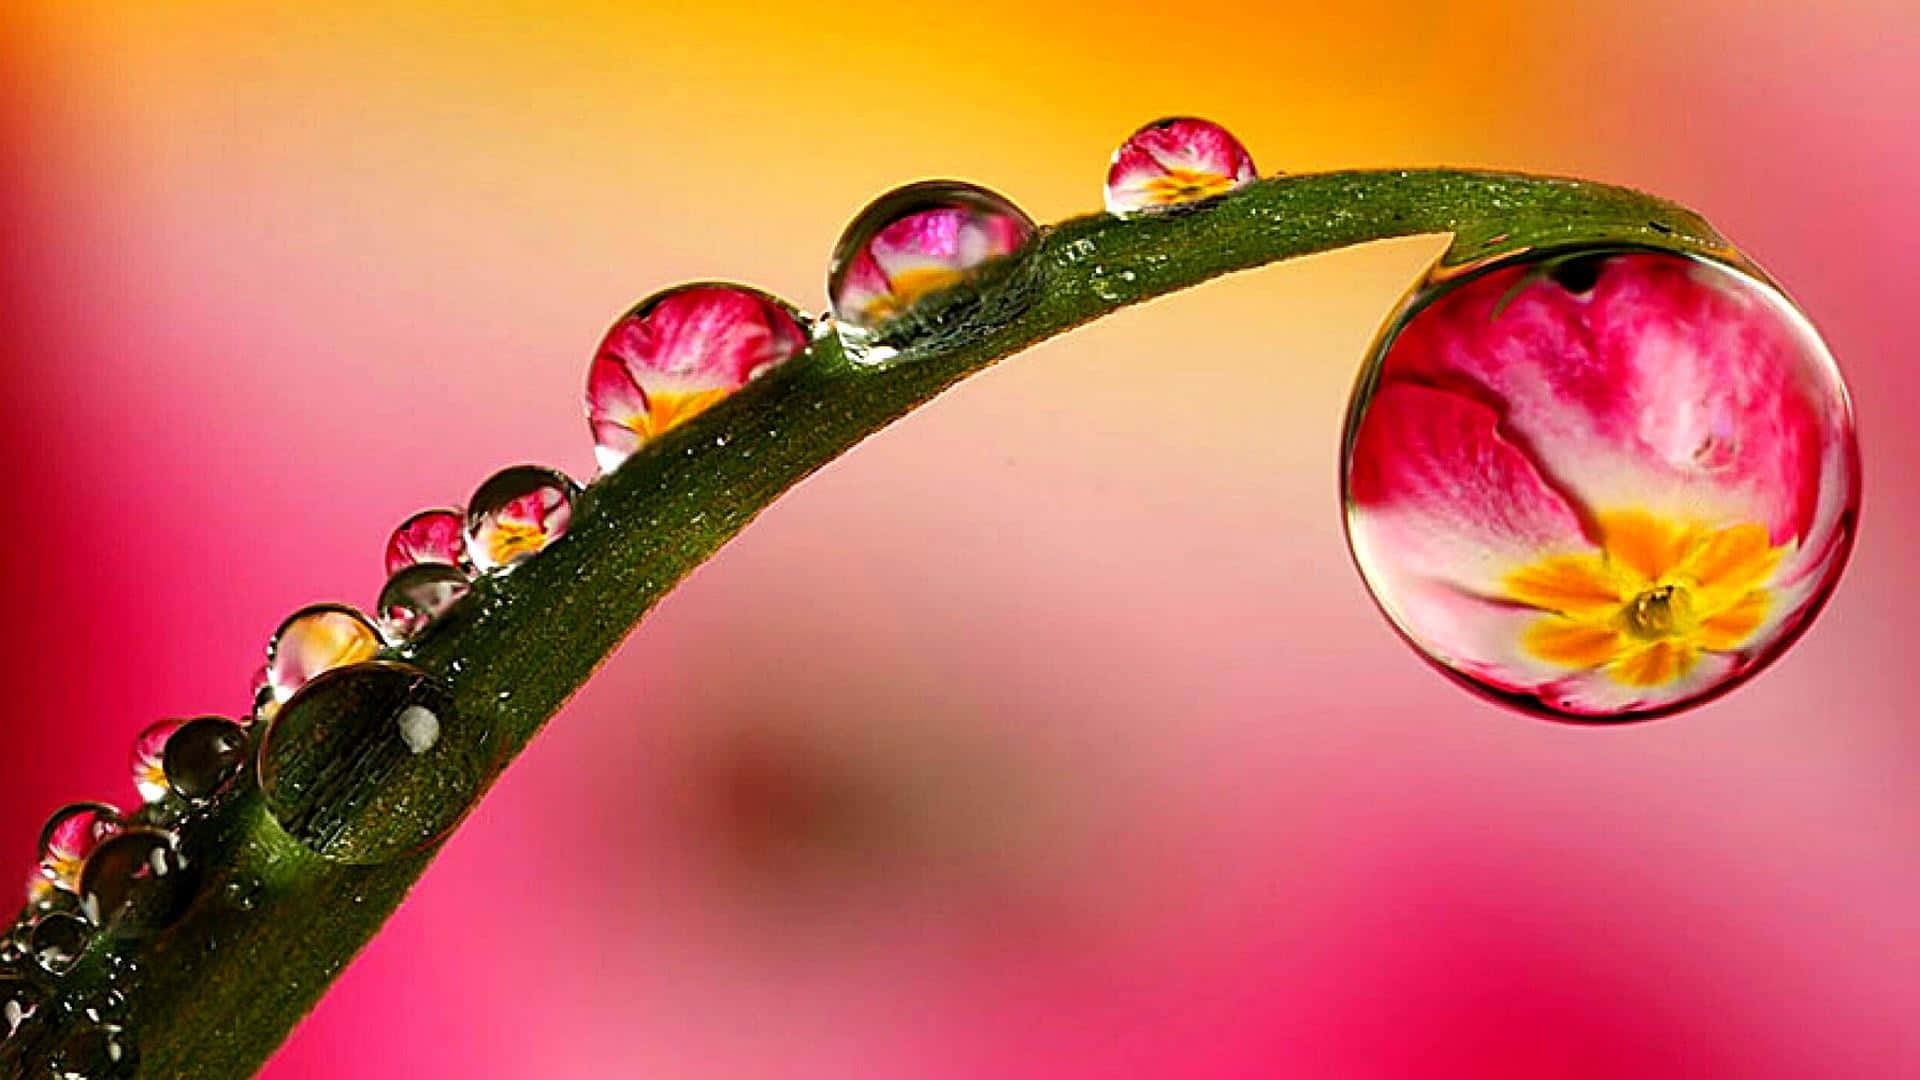 "The beauty of a single water drop"